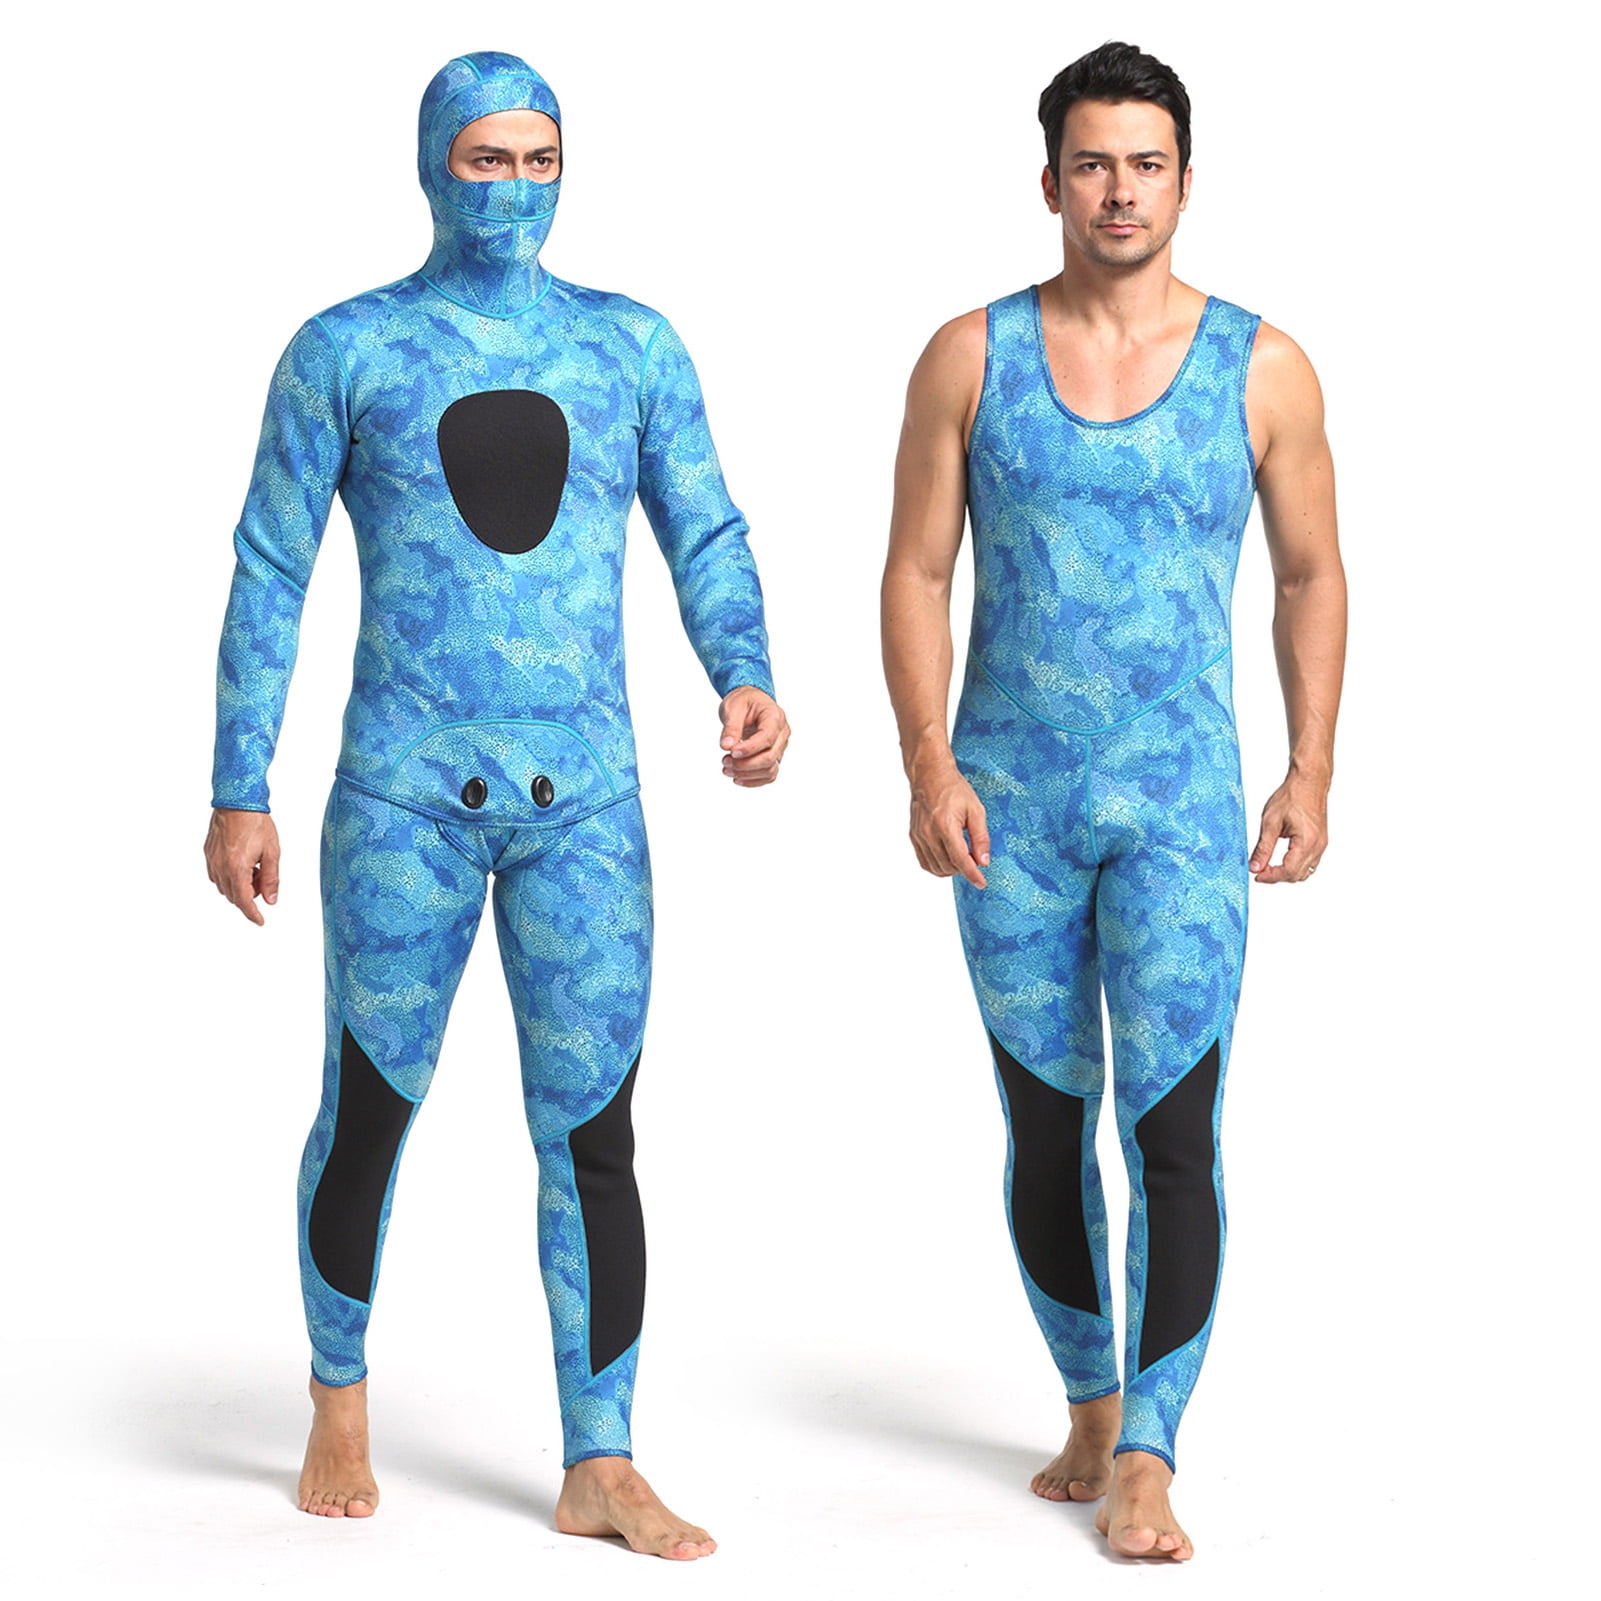 Details about   Mens 3mm Camo Wetsuit Scuba Diving Jet Ski Surfing Spearfishing Full Body Suit